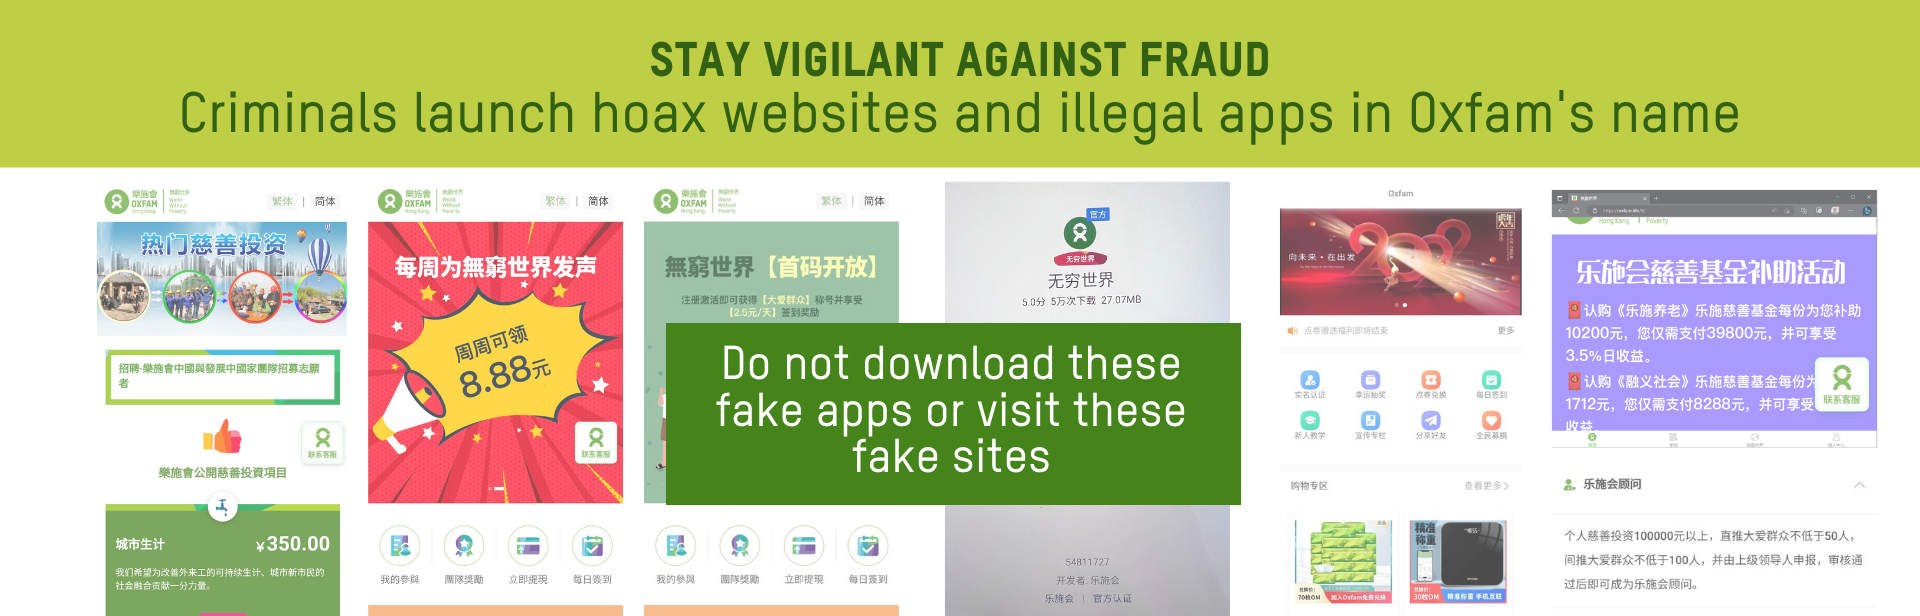 Statement on hoax websites and illegal apps